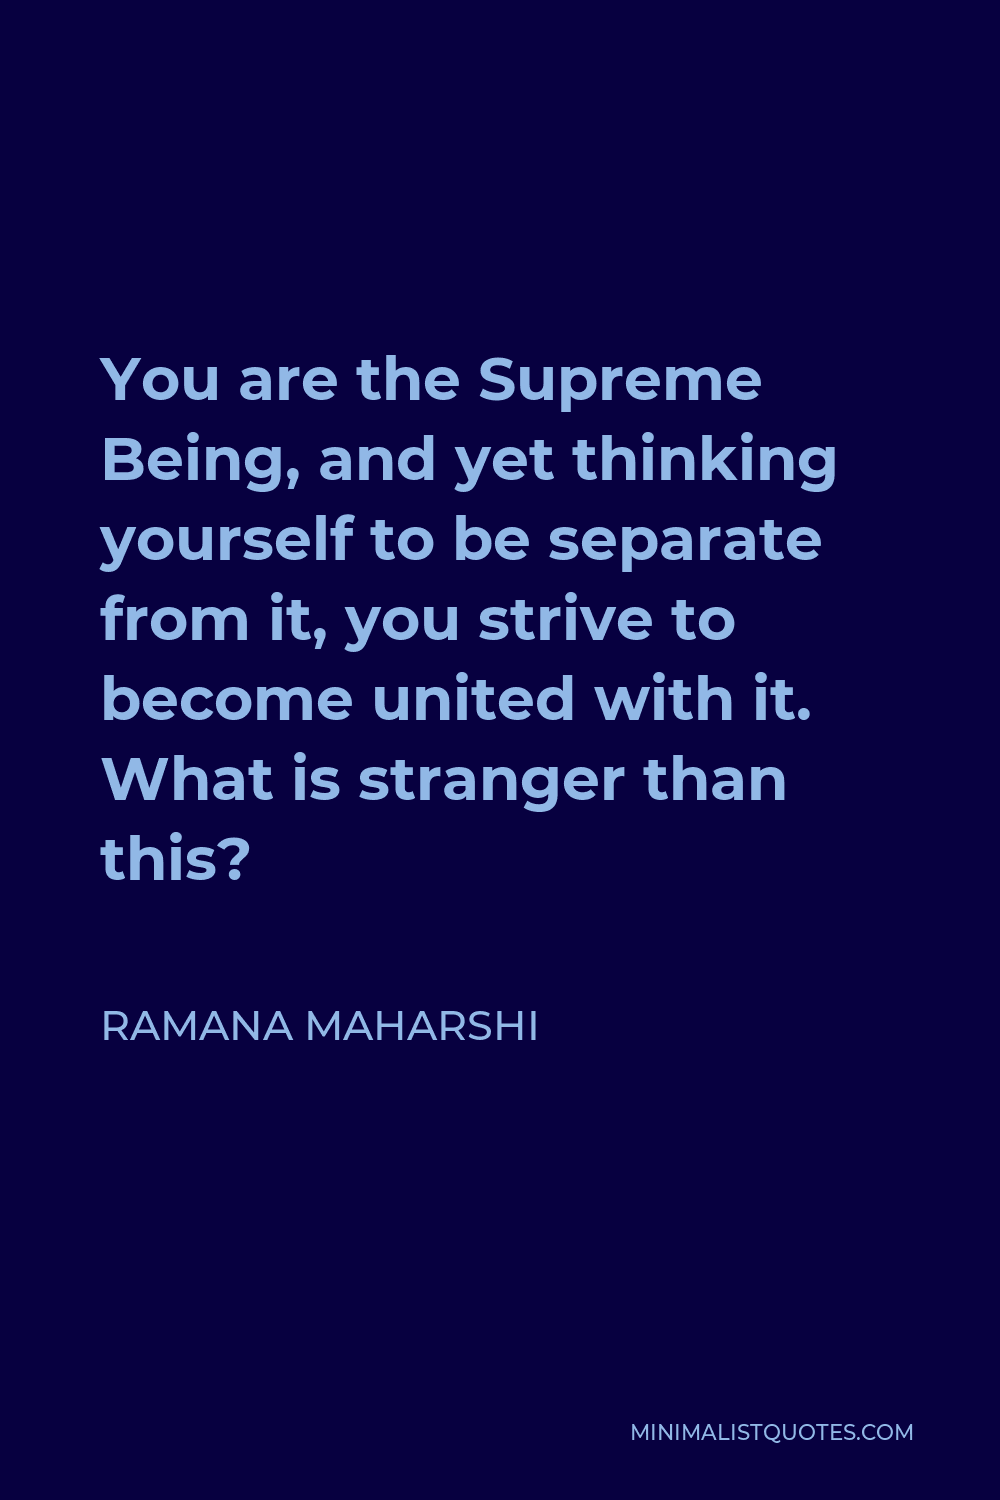 Ramana Maharshi Quote - You are the Supreme Being, and yet thinking yourself to be separate from it, you strive to become united with it. What is stranger than this?